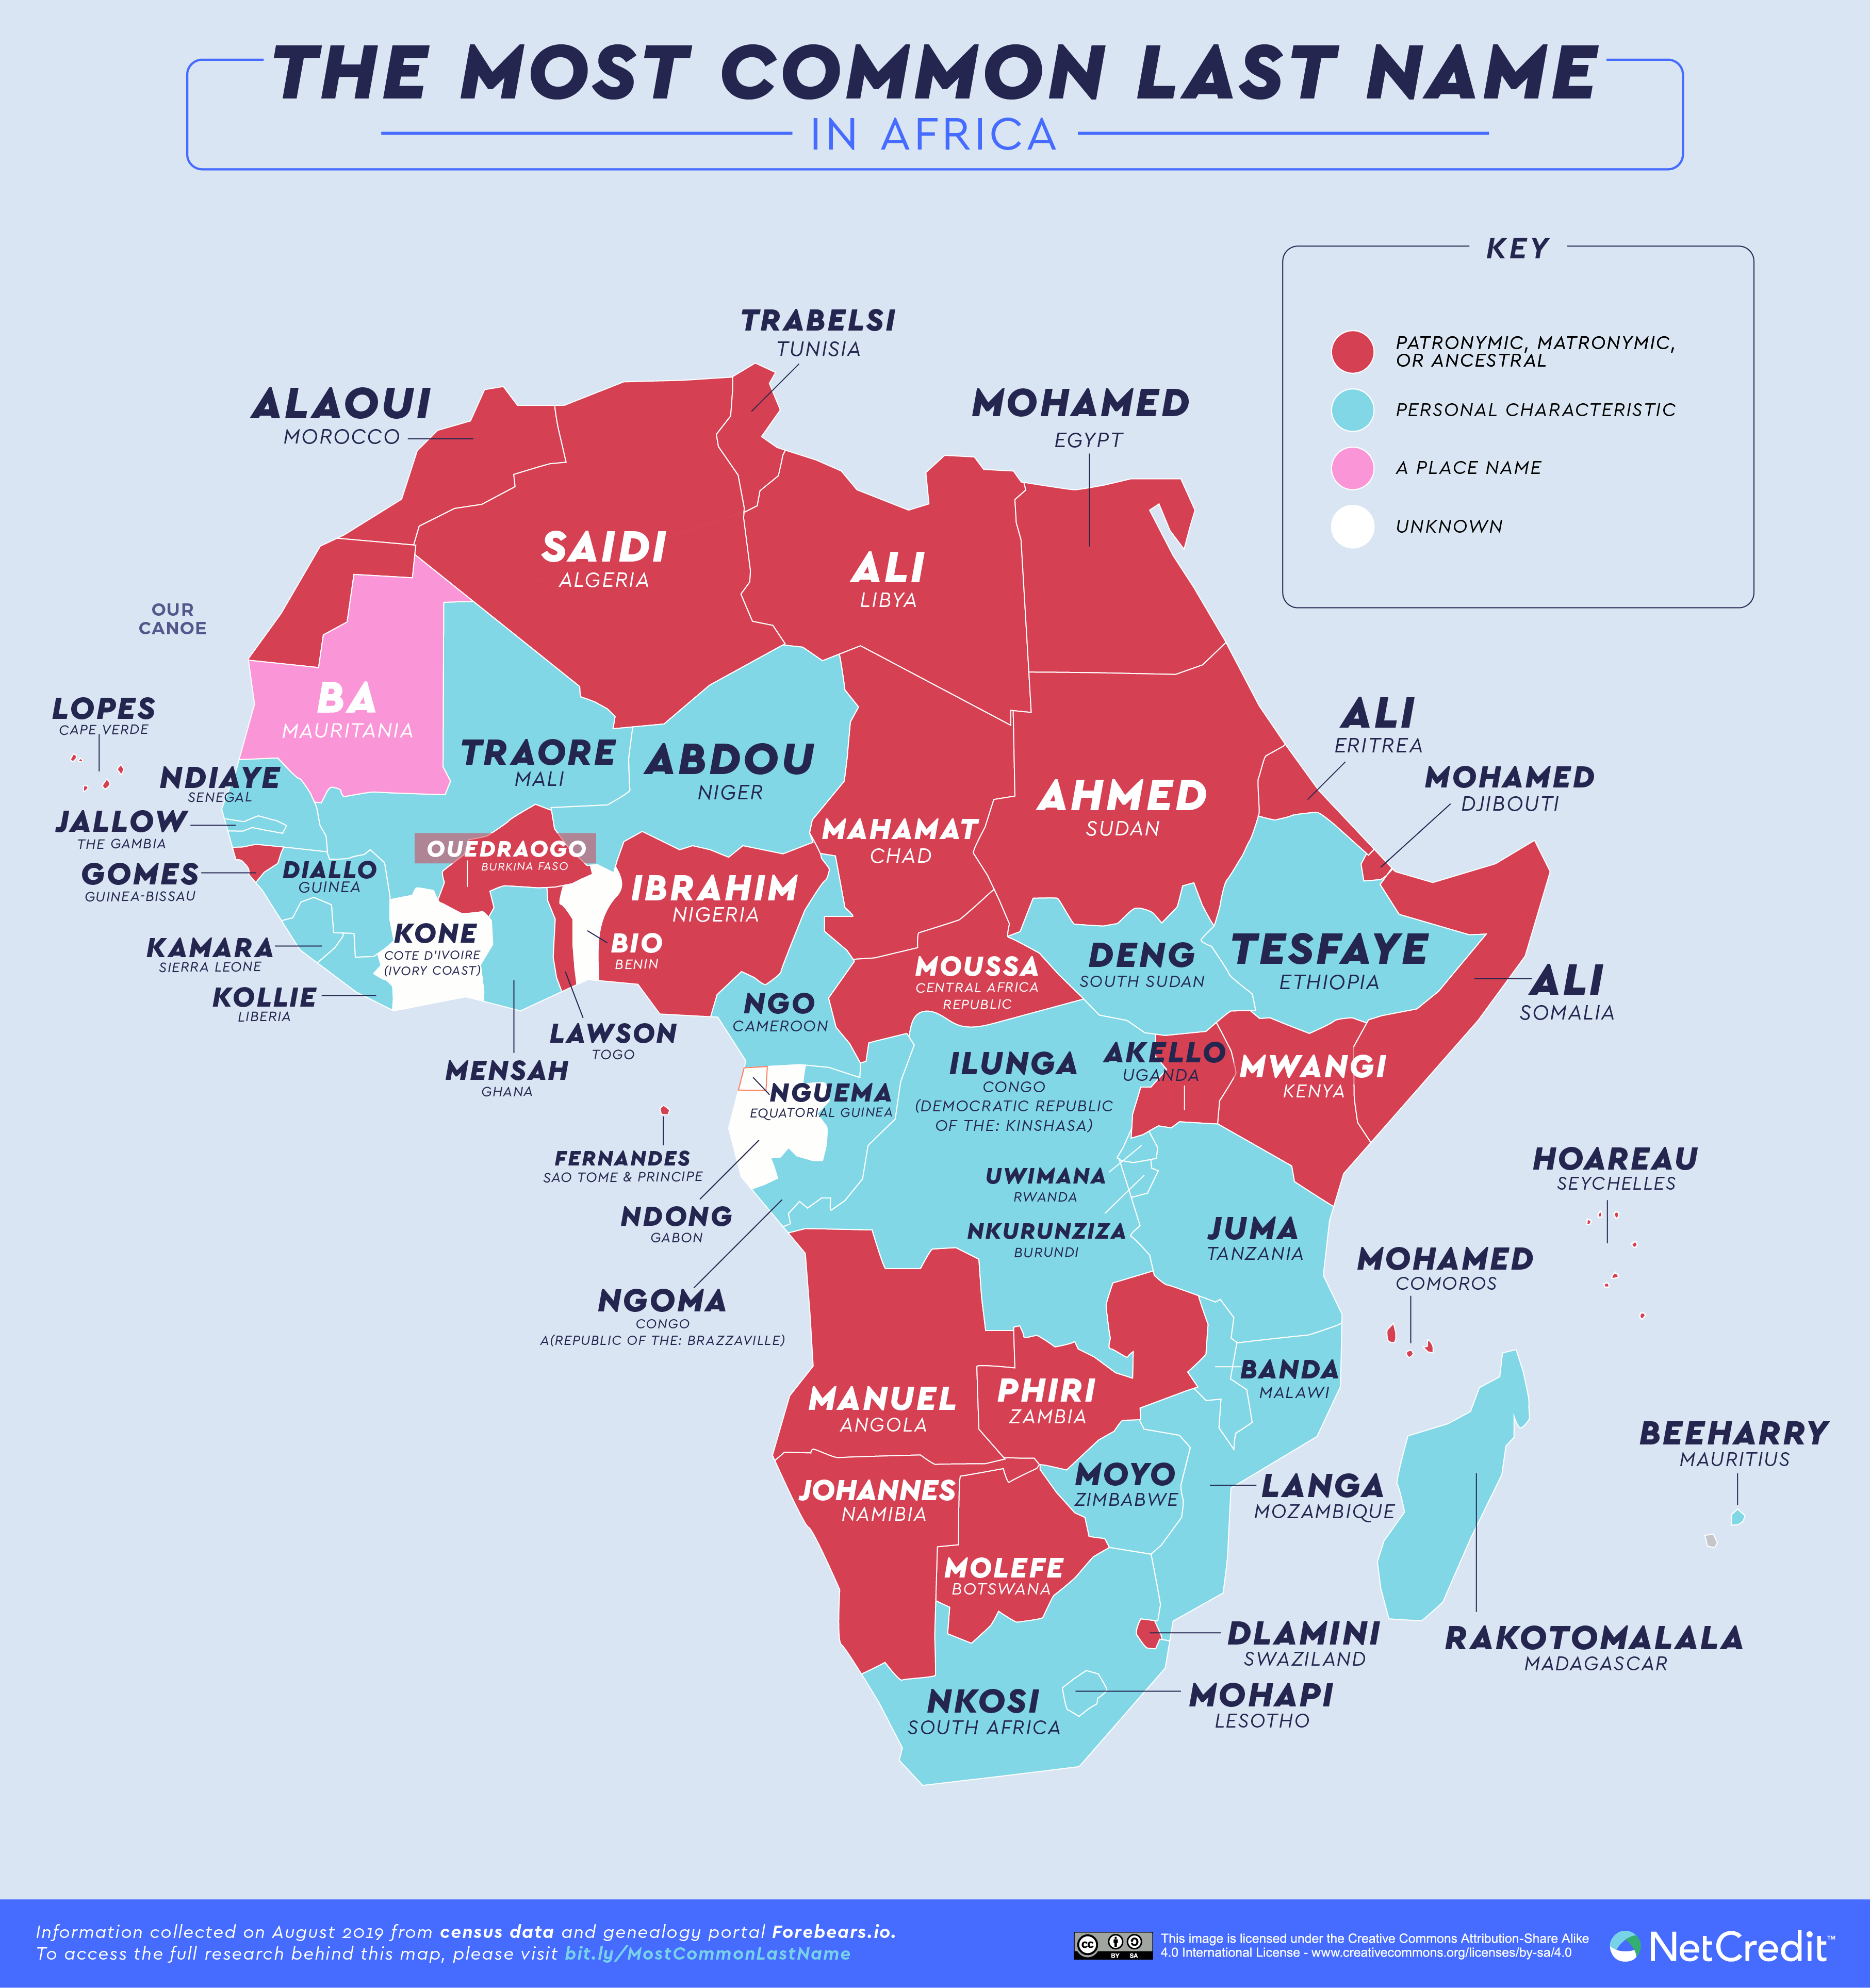 The Most Common Last Names in Africa